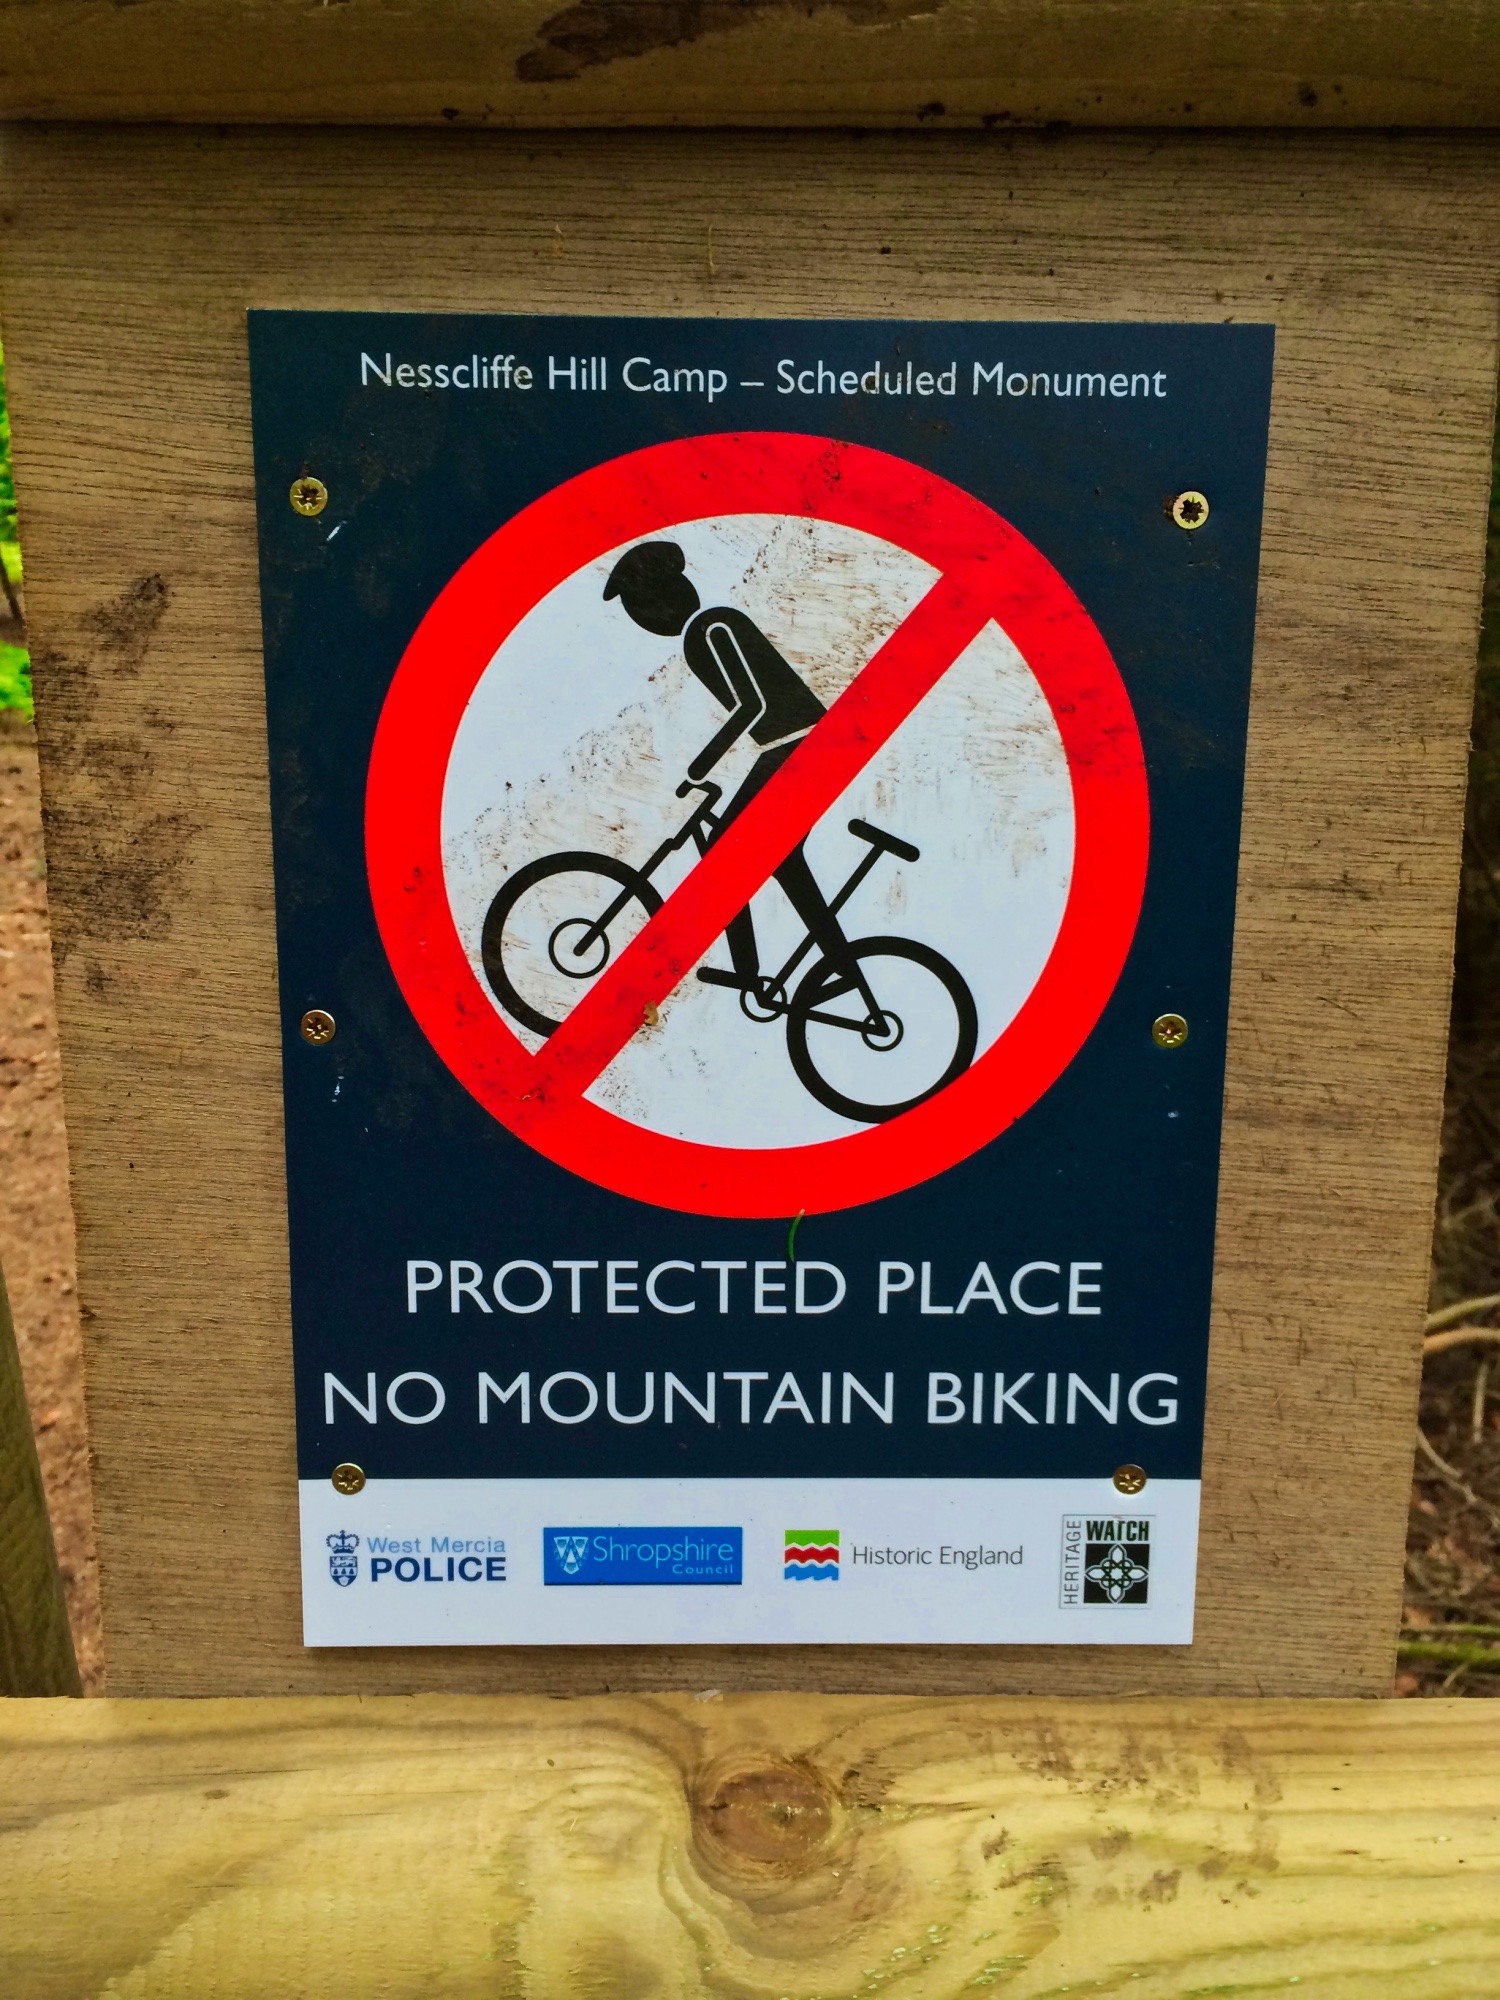  The routes that bikes are allowed to take are well signposted. However, bikes are not allowed on the trail through the ancient Hill Fort to protect history. Other trails bypass the hill fort.